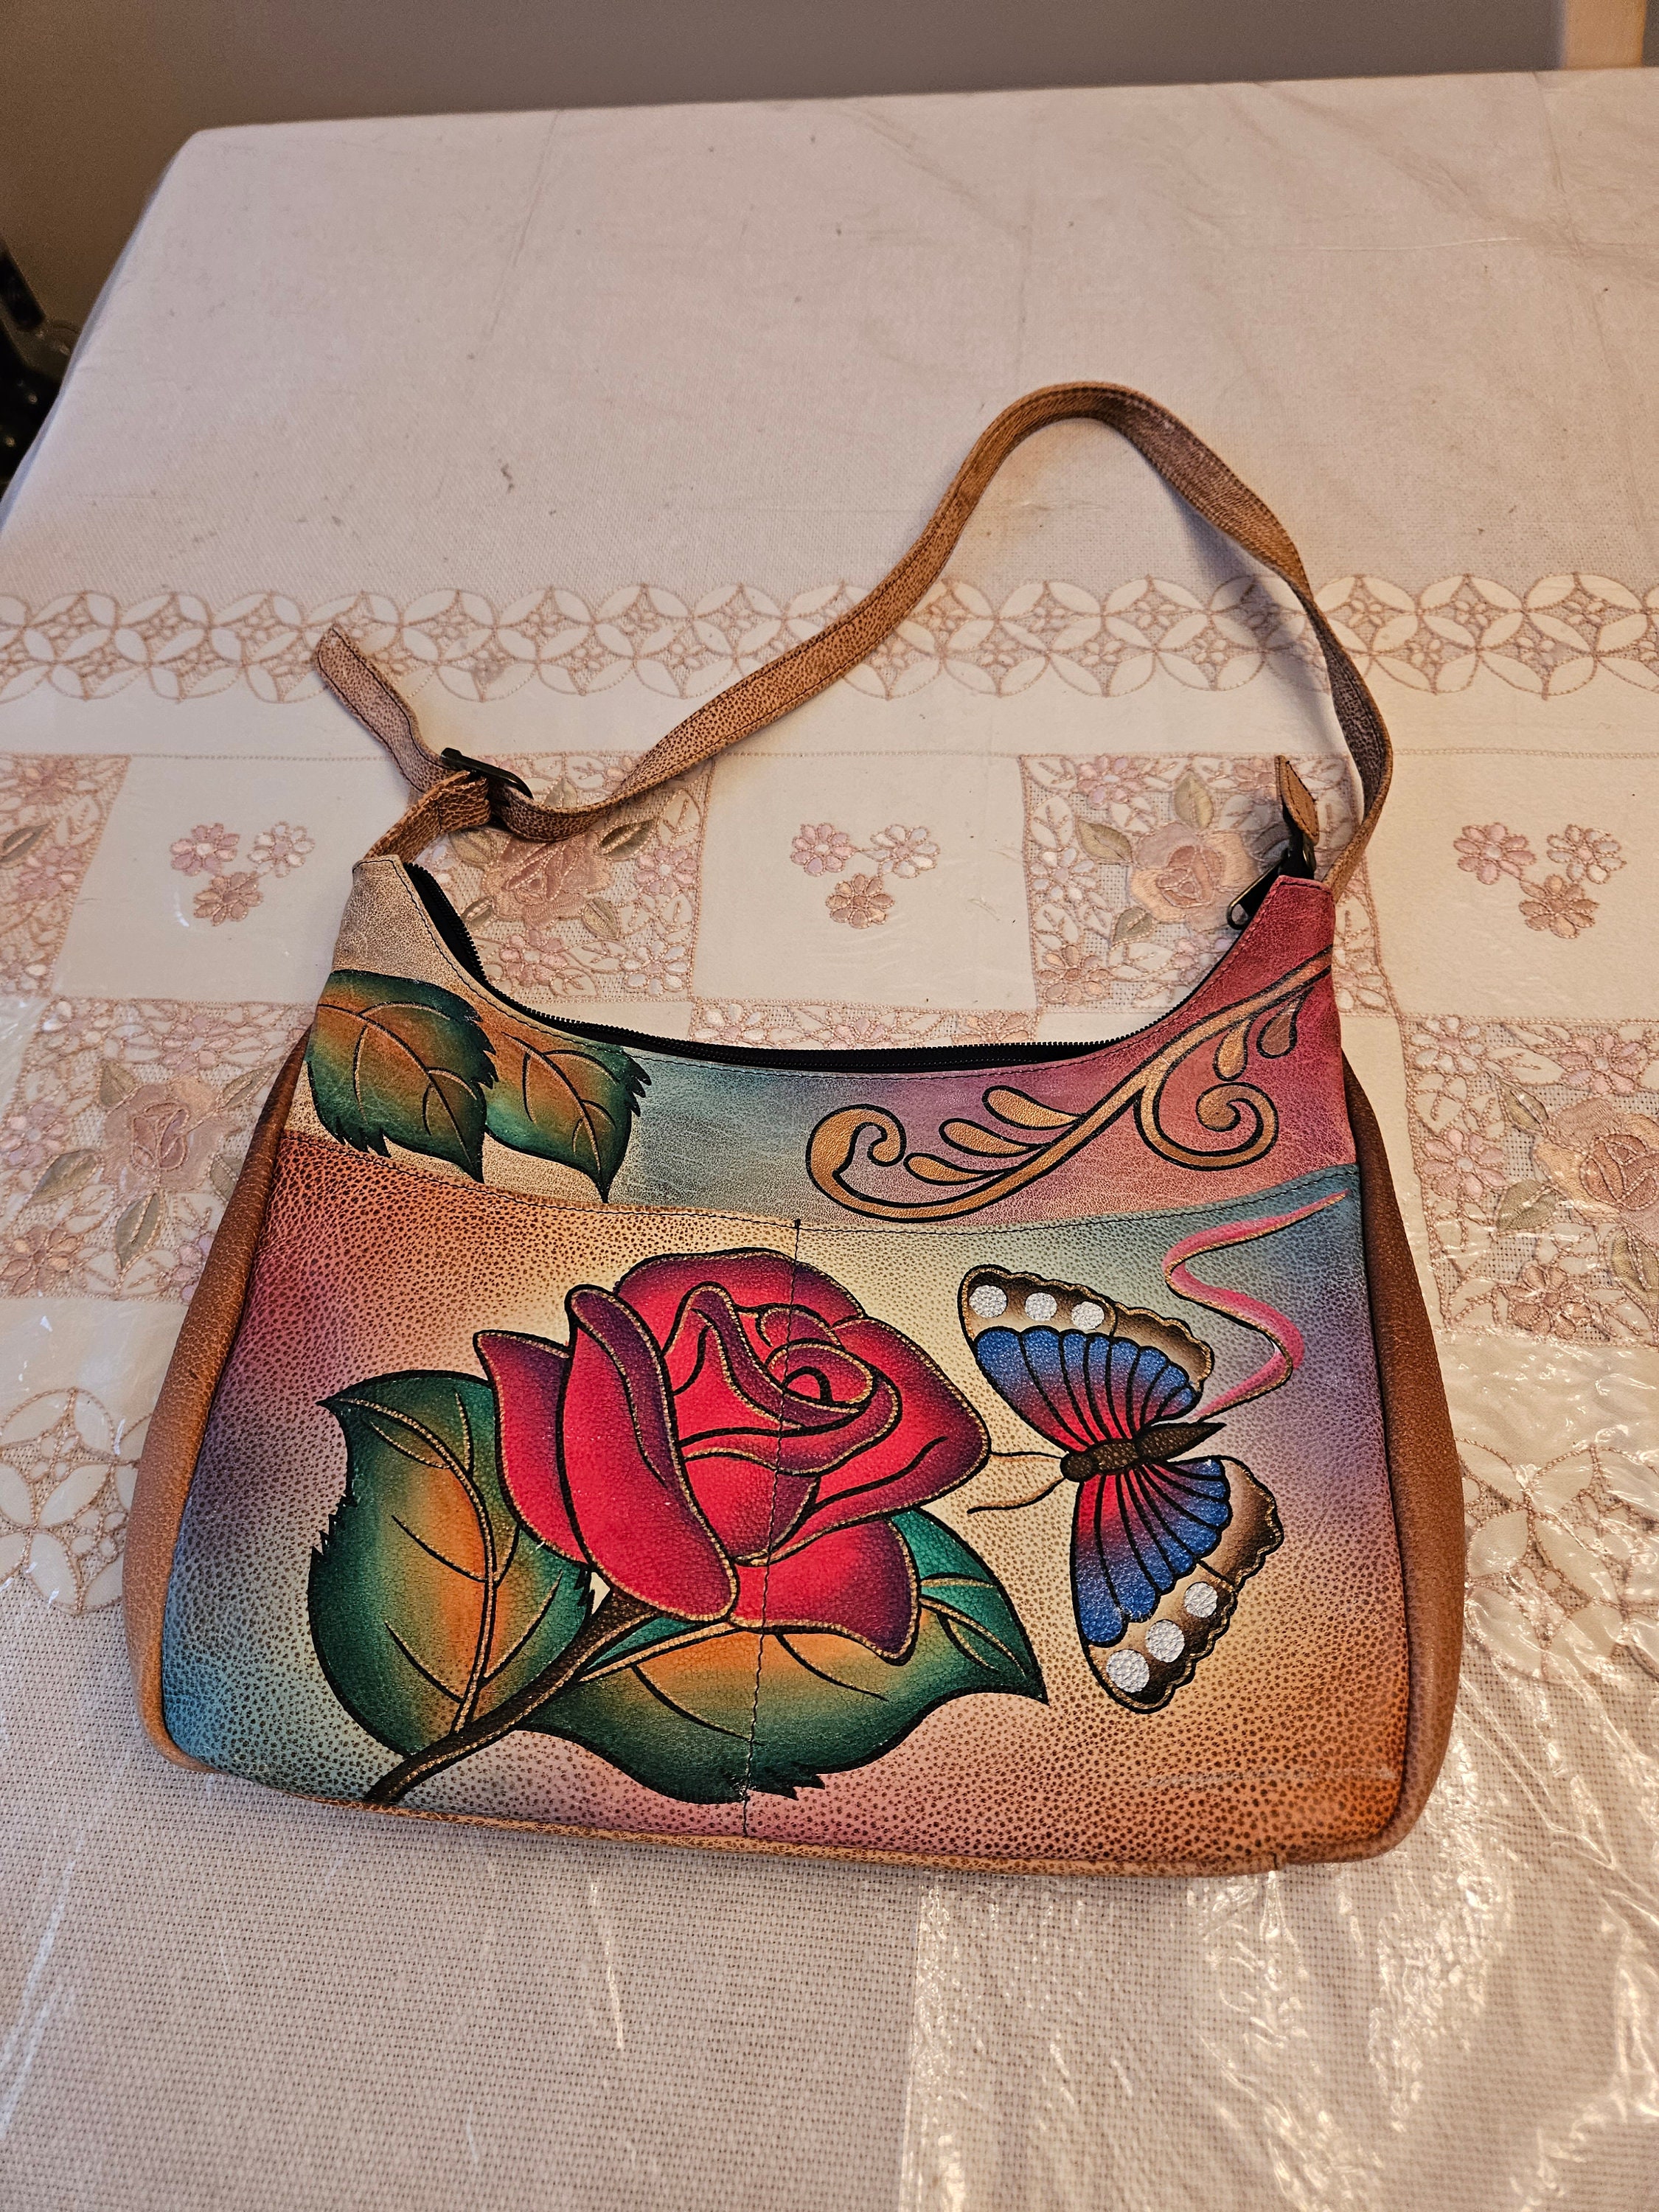 Anna by Anuschka Playful Dolphin Hand-Painted Leather Dome Crossbody Bag, Best Price and Reviews